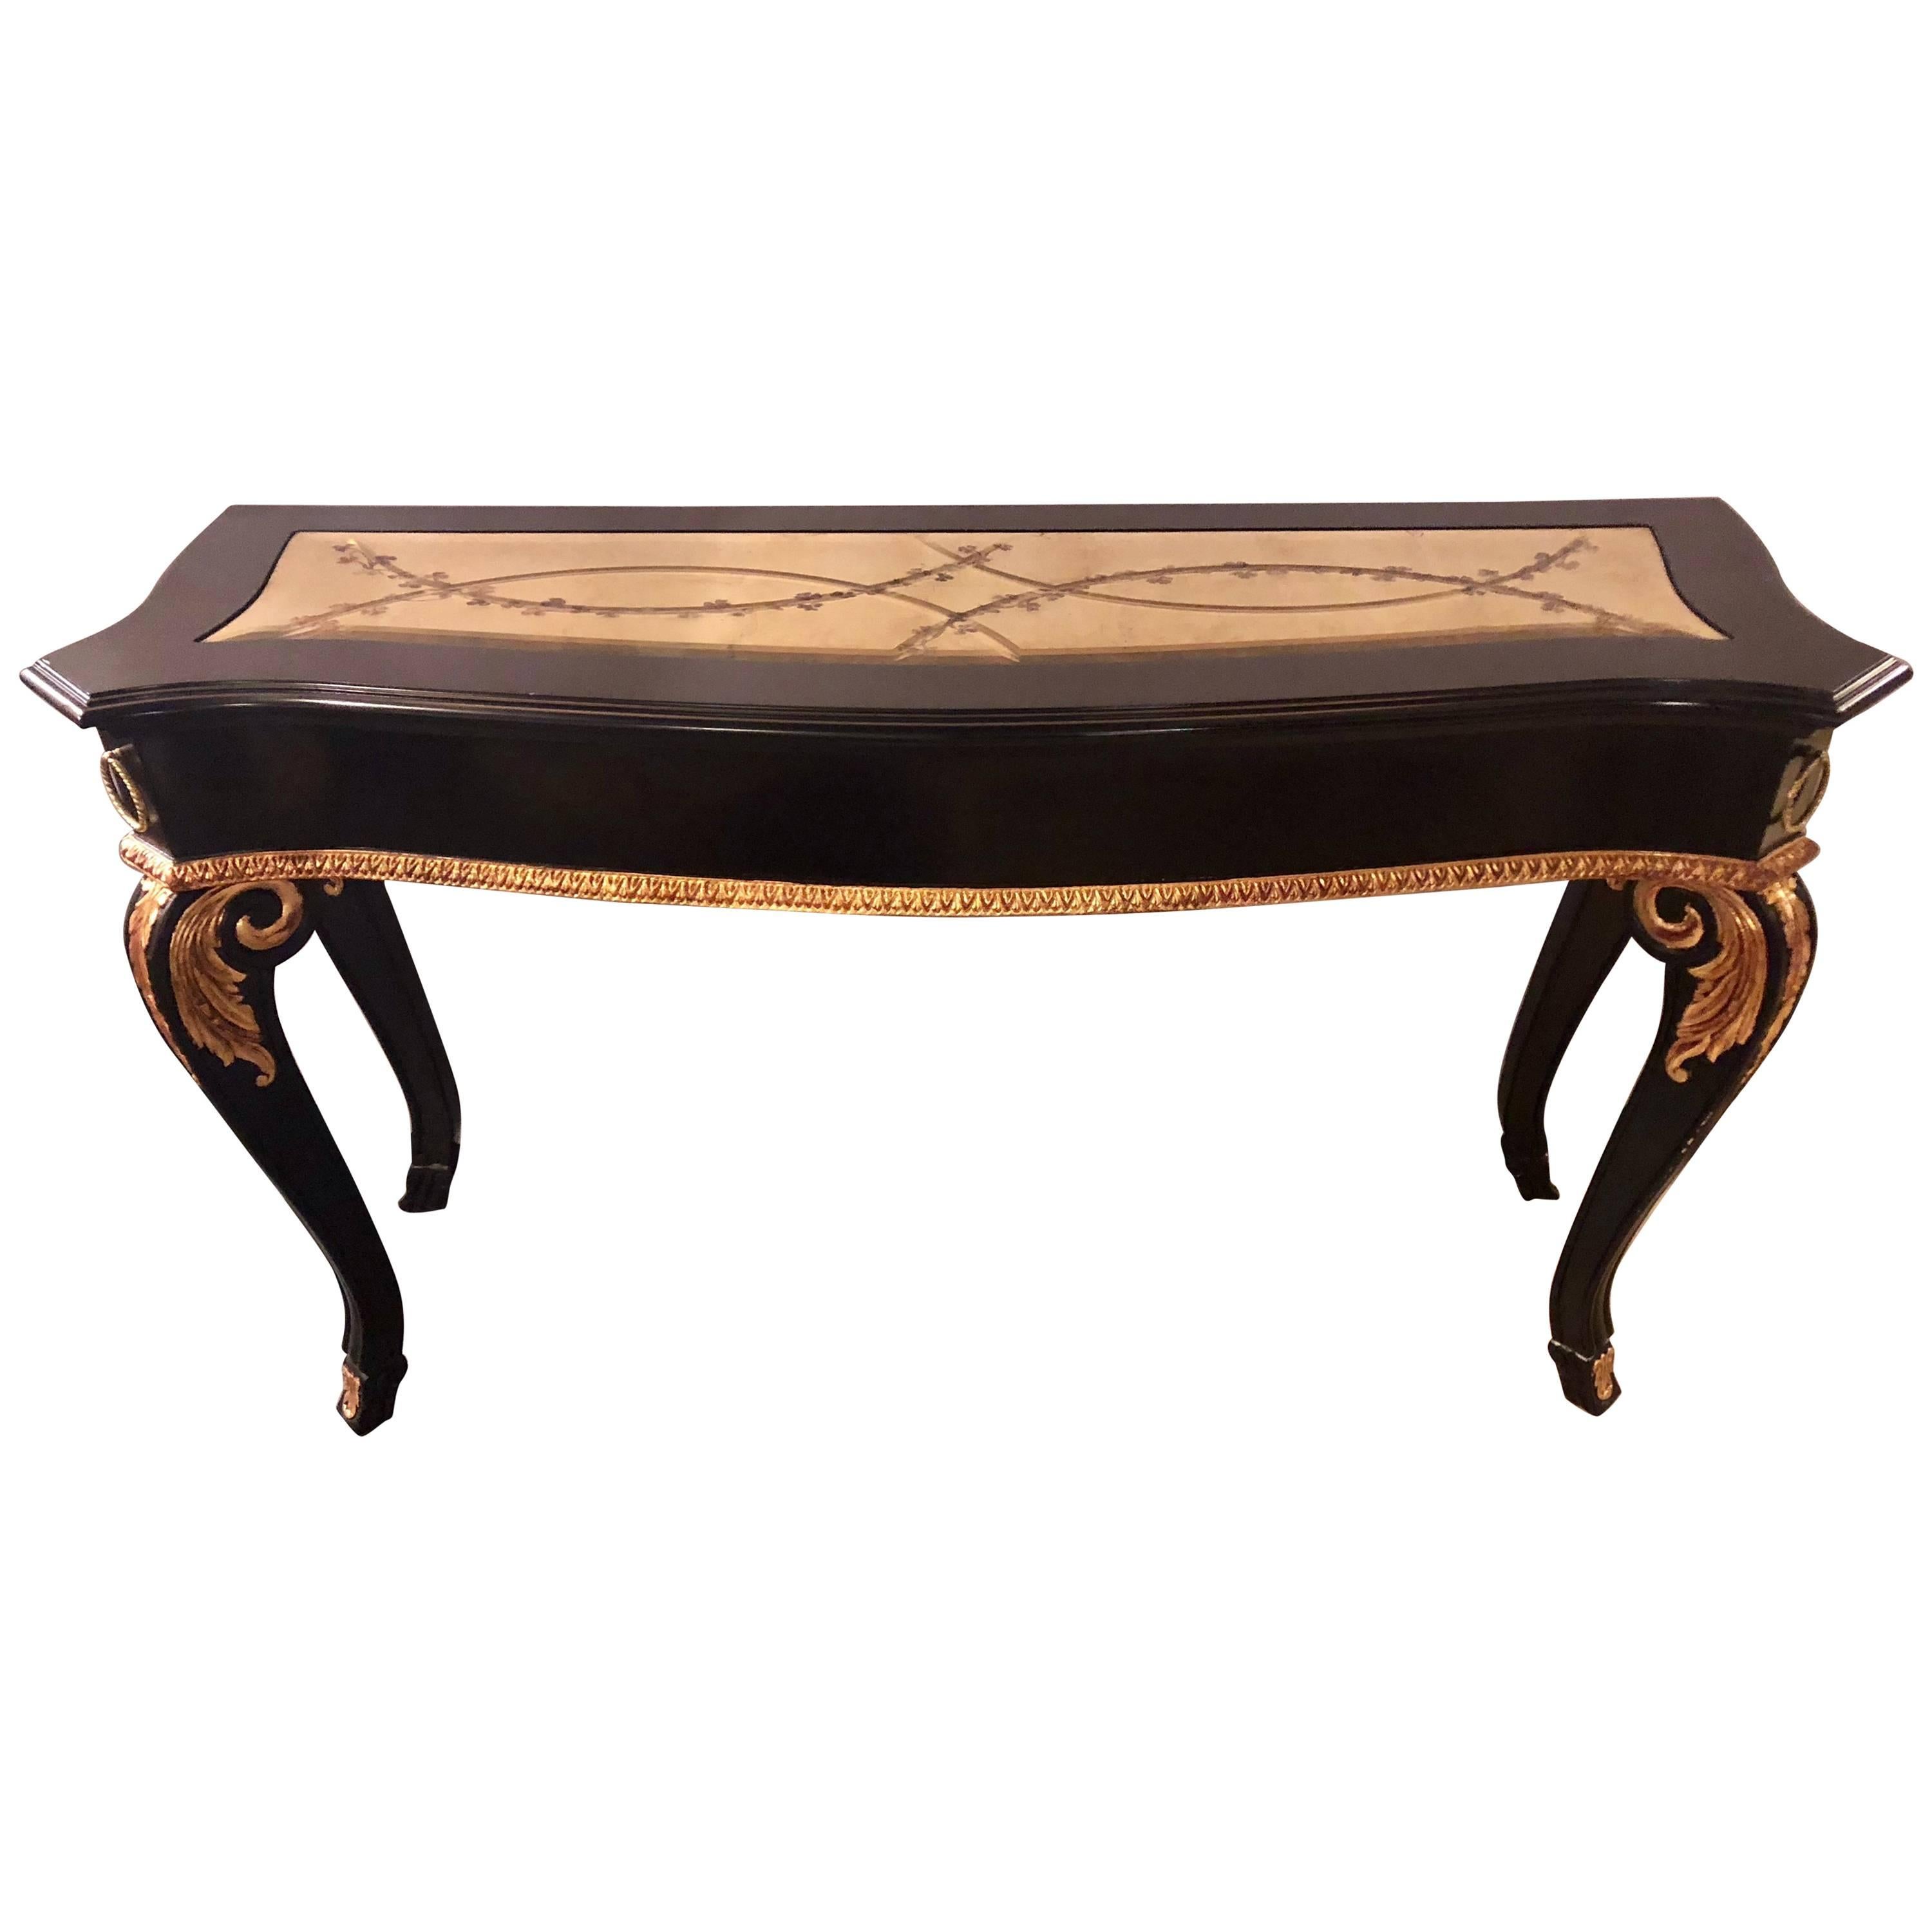 Ebony and Parcel-Gilt Decorated Console / Sofa Table with Fine Beveled Glass Top